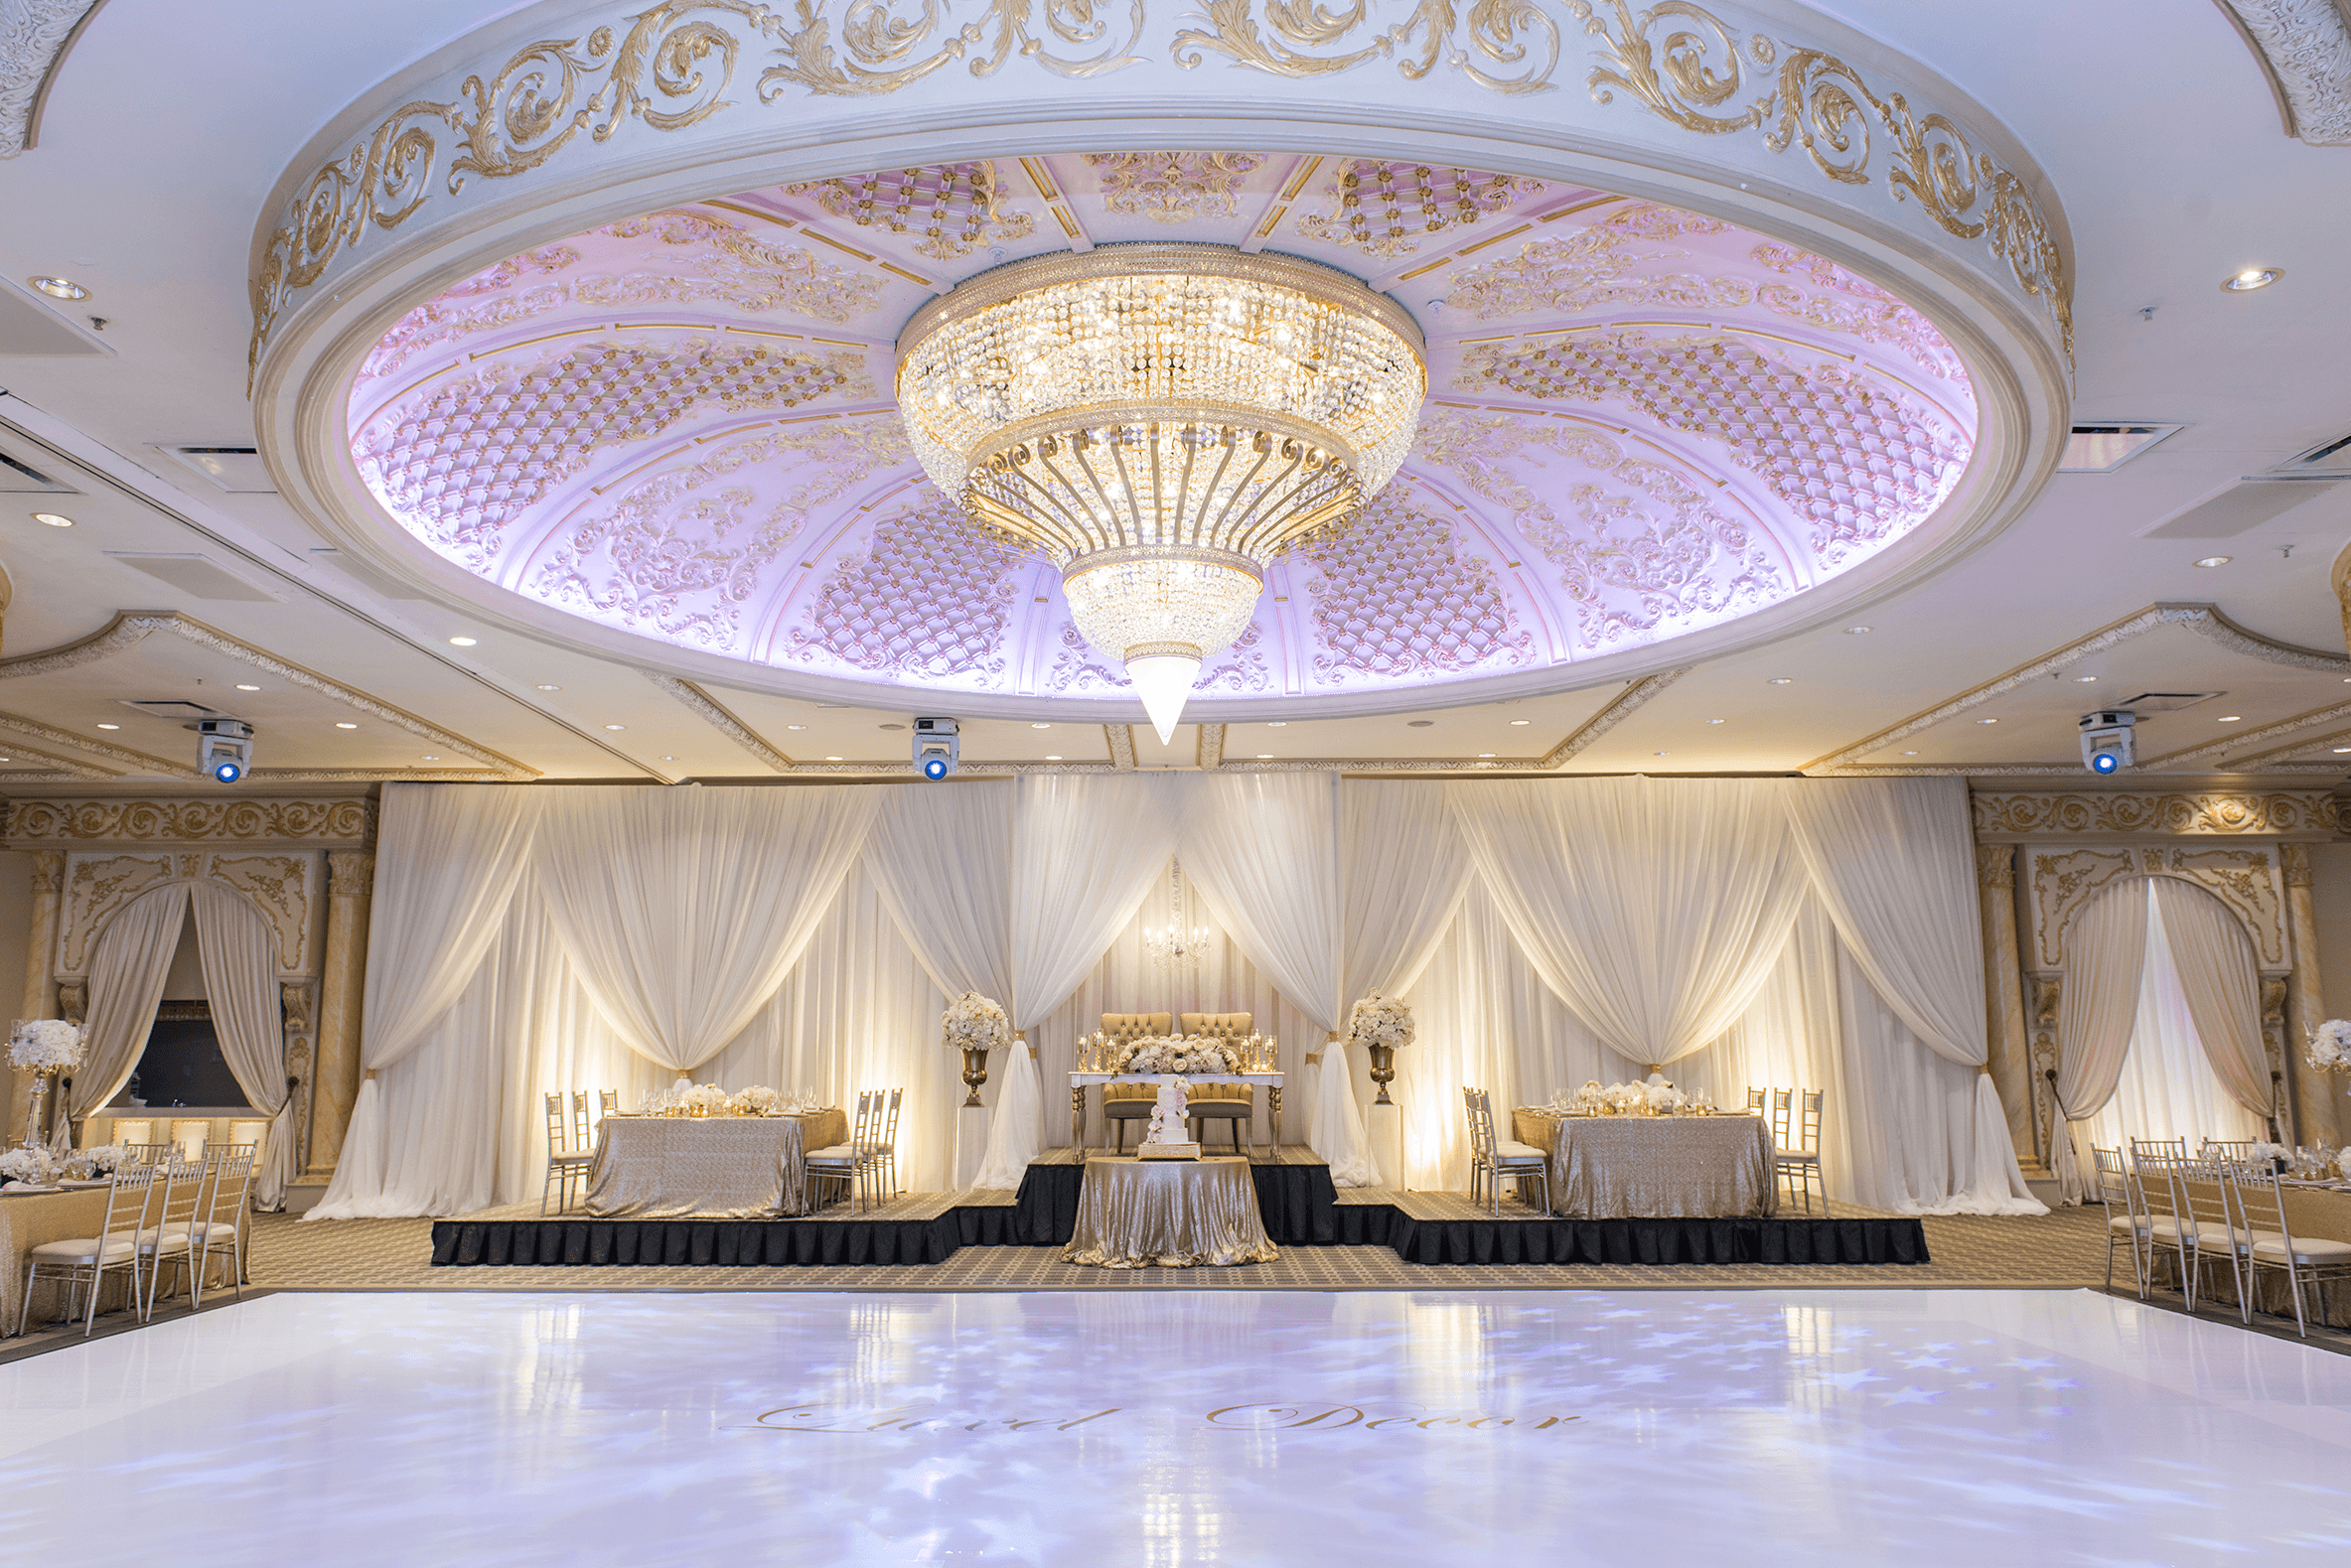 A wide shot of the hall showing the large chandelier on the ceiling, expansive dance floor, and seating arrangements.